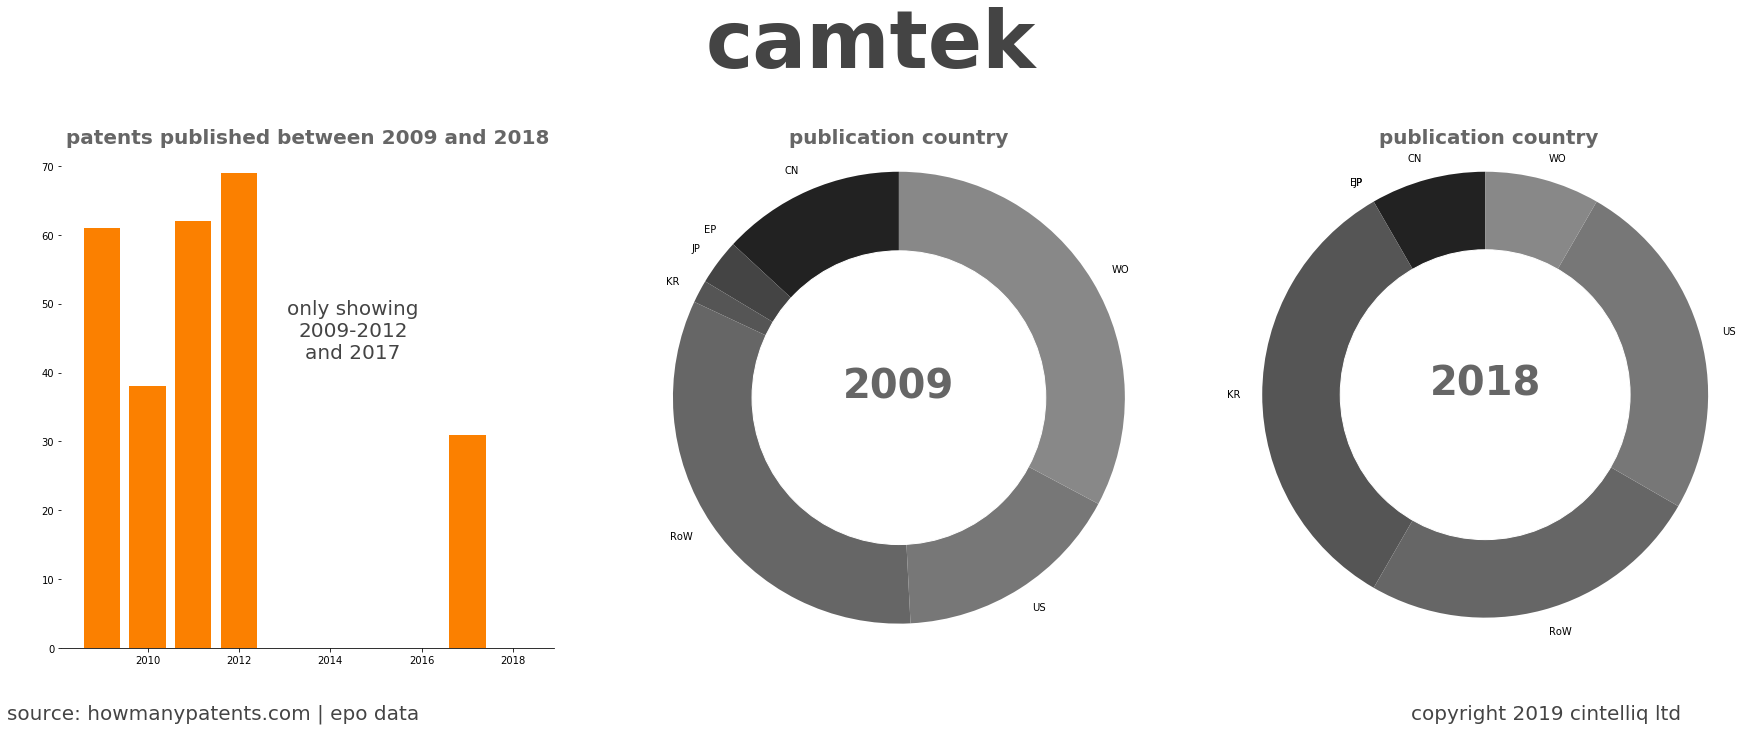 summary of patents for Camtek